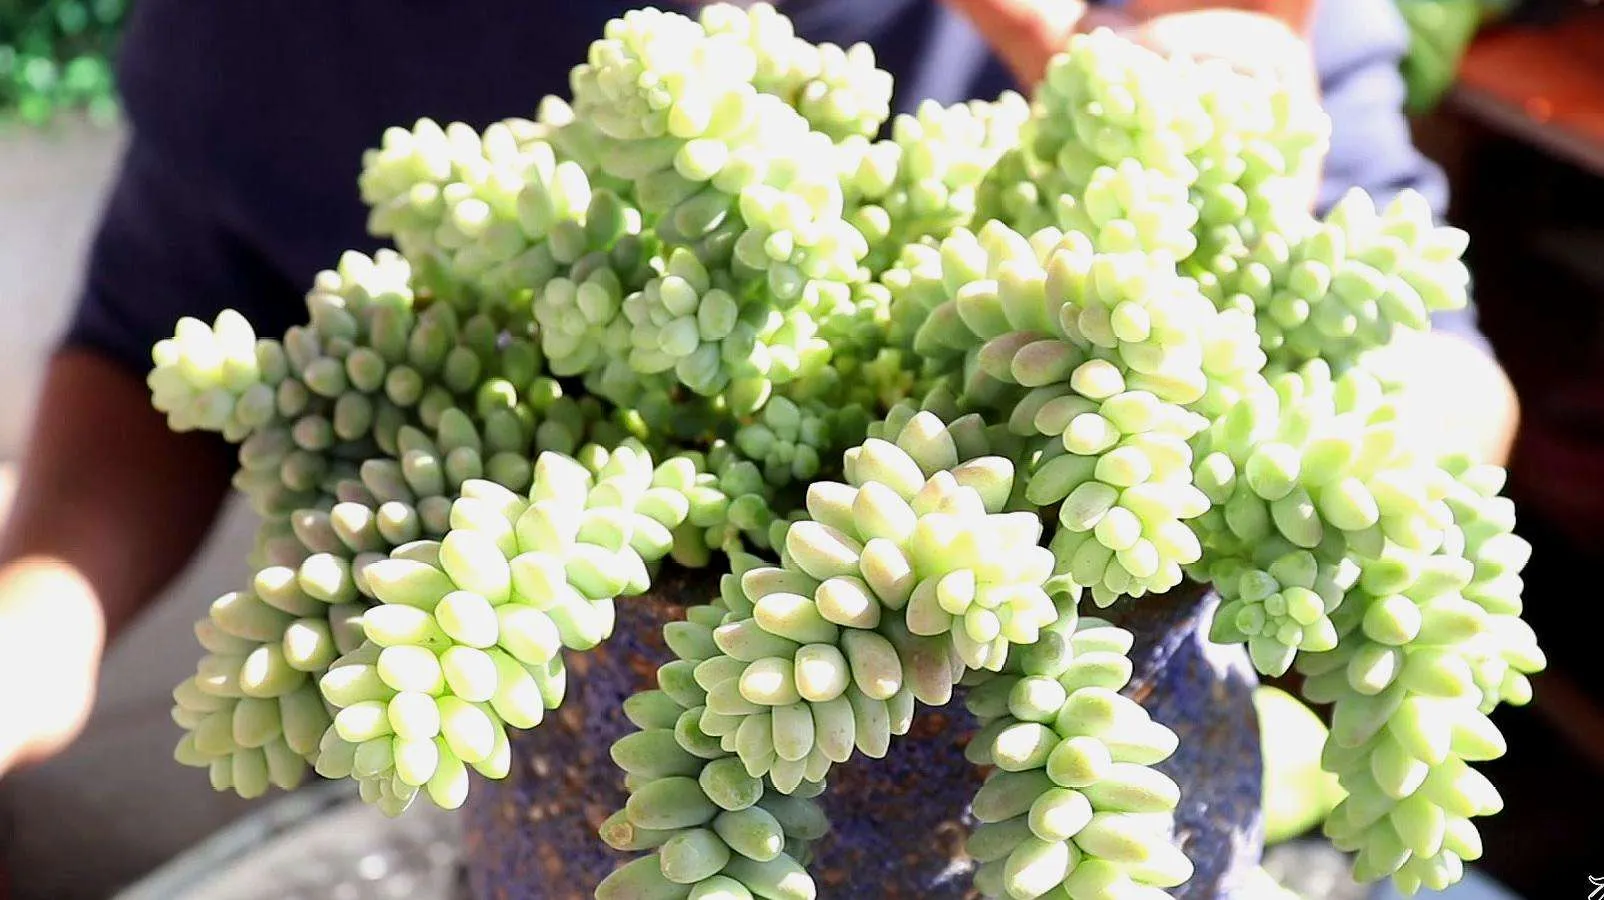 How To Save My Overwatered Burros Tail